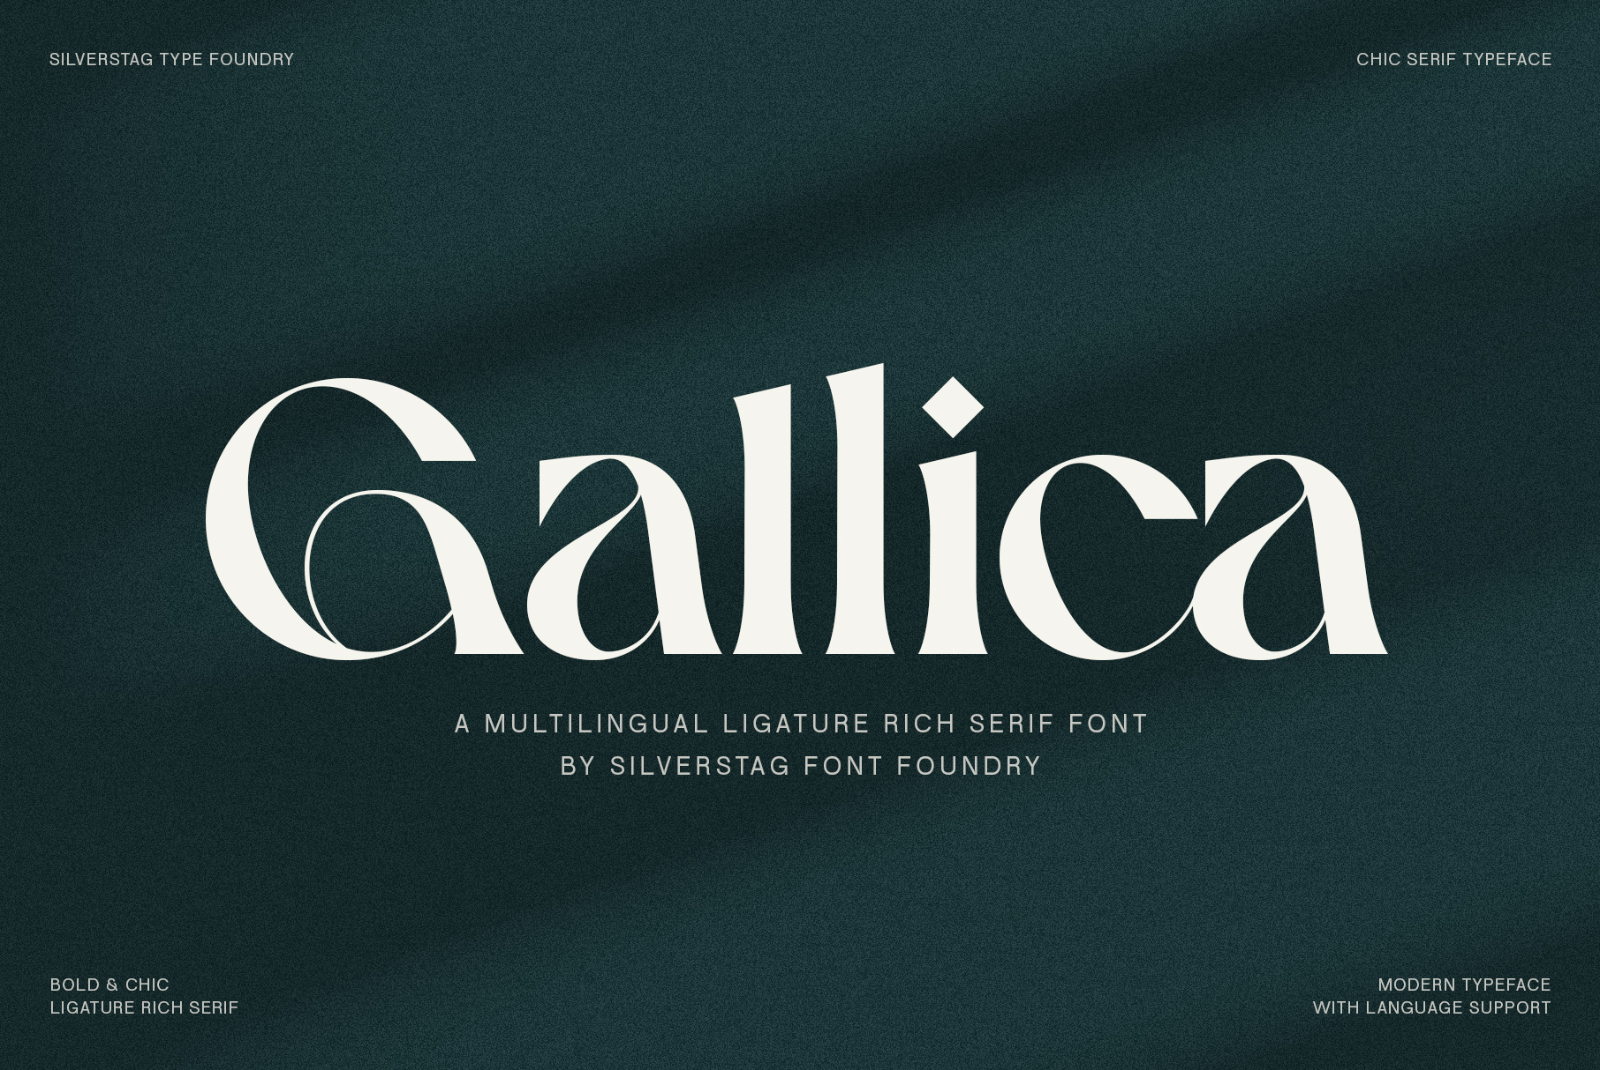 Elegant multilingual serif font Gallica showcased with ligatures, designed by Silverstag, ideal for designers creating chic and modern graphics.